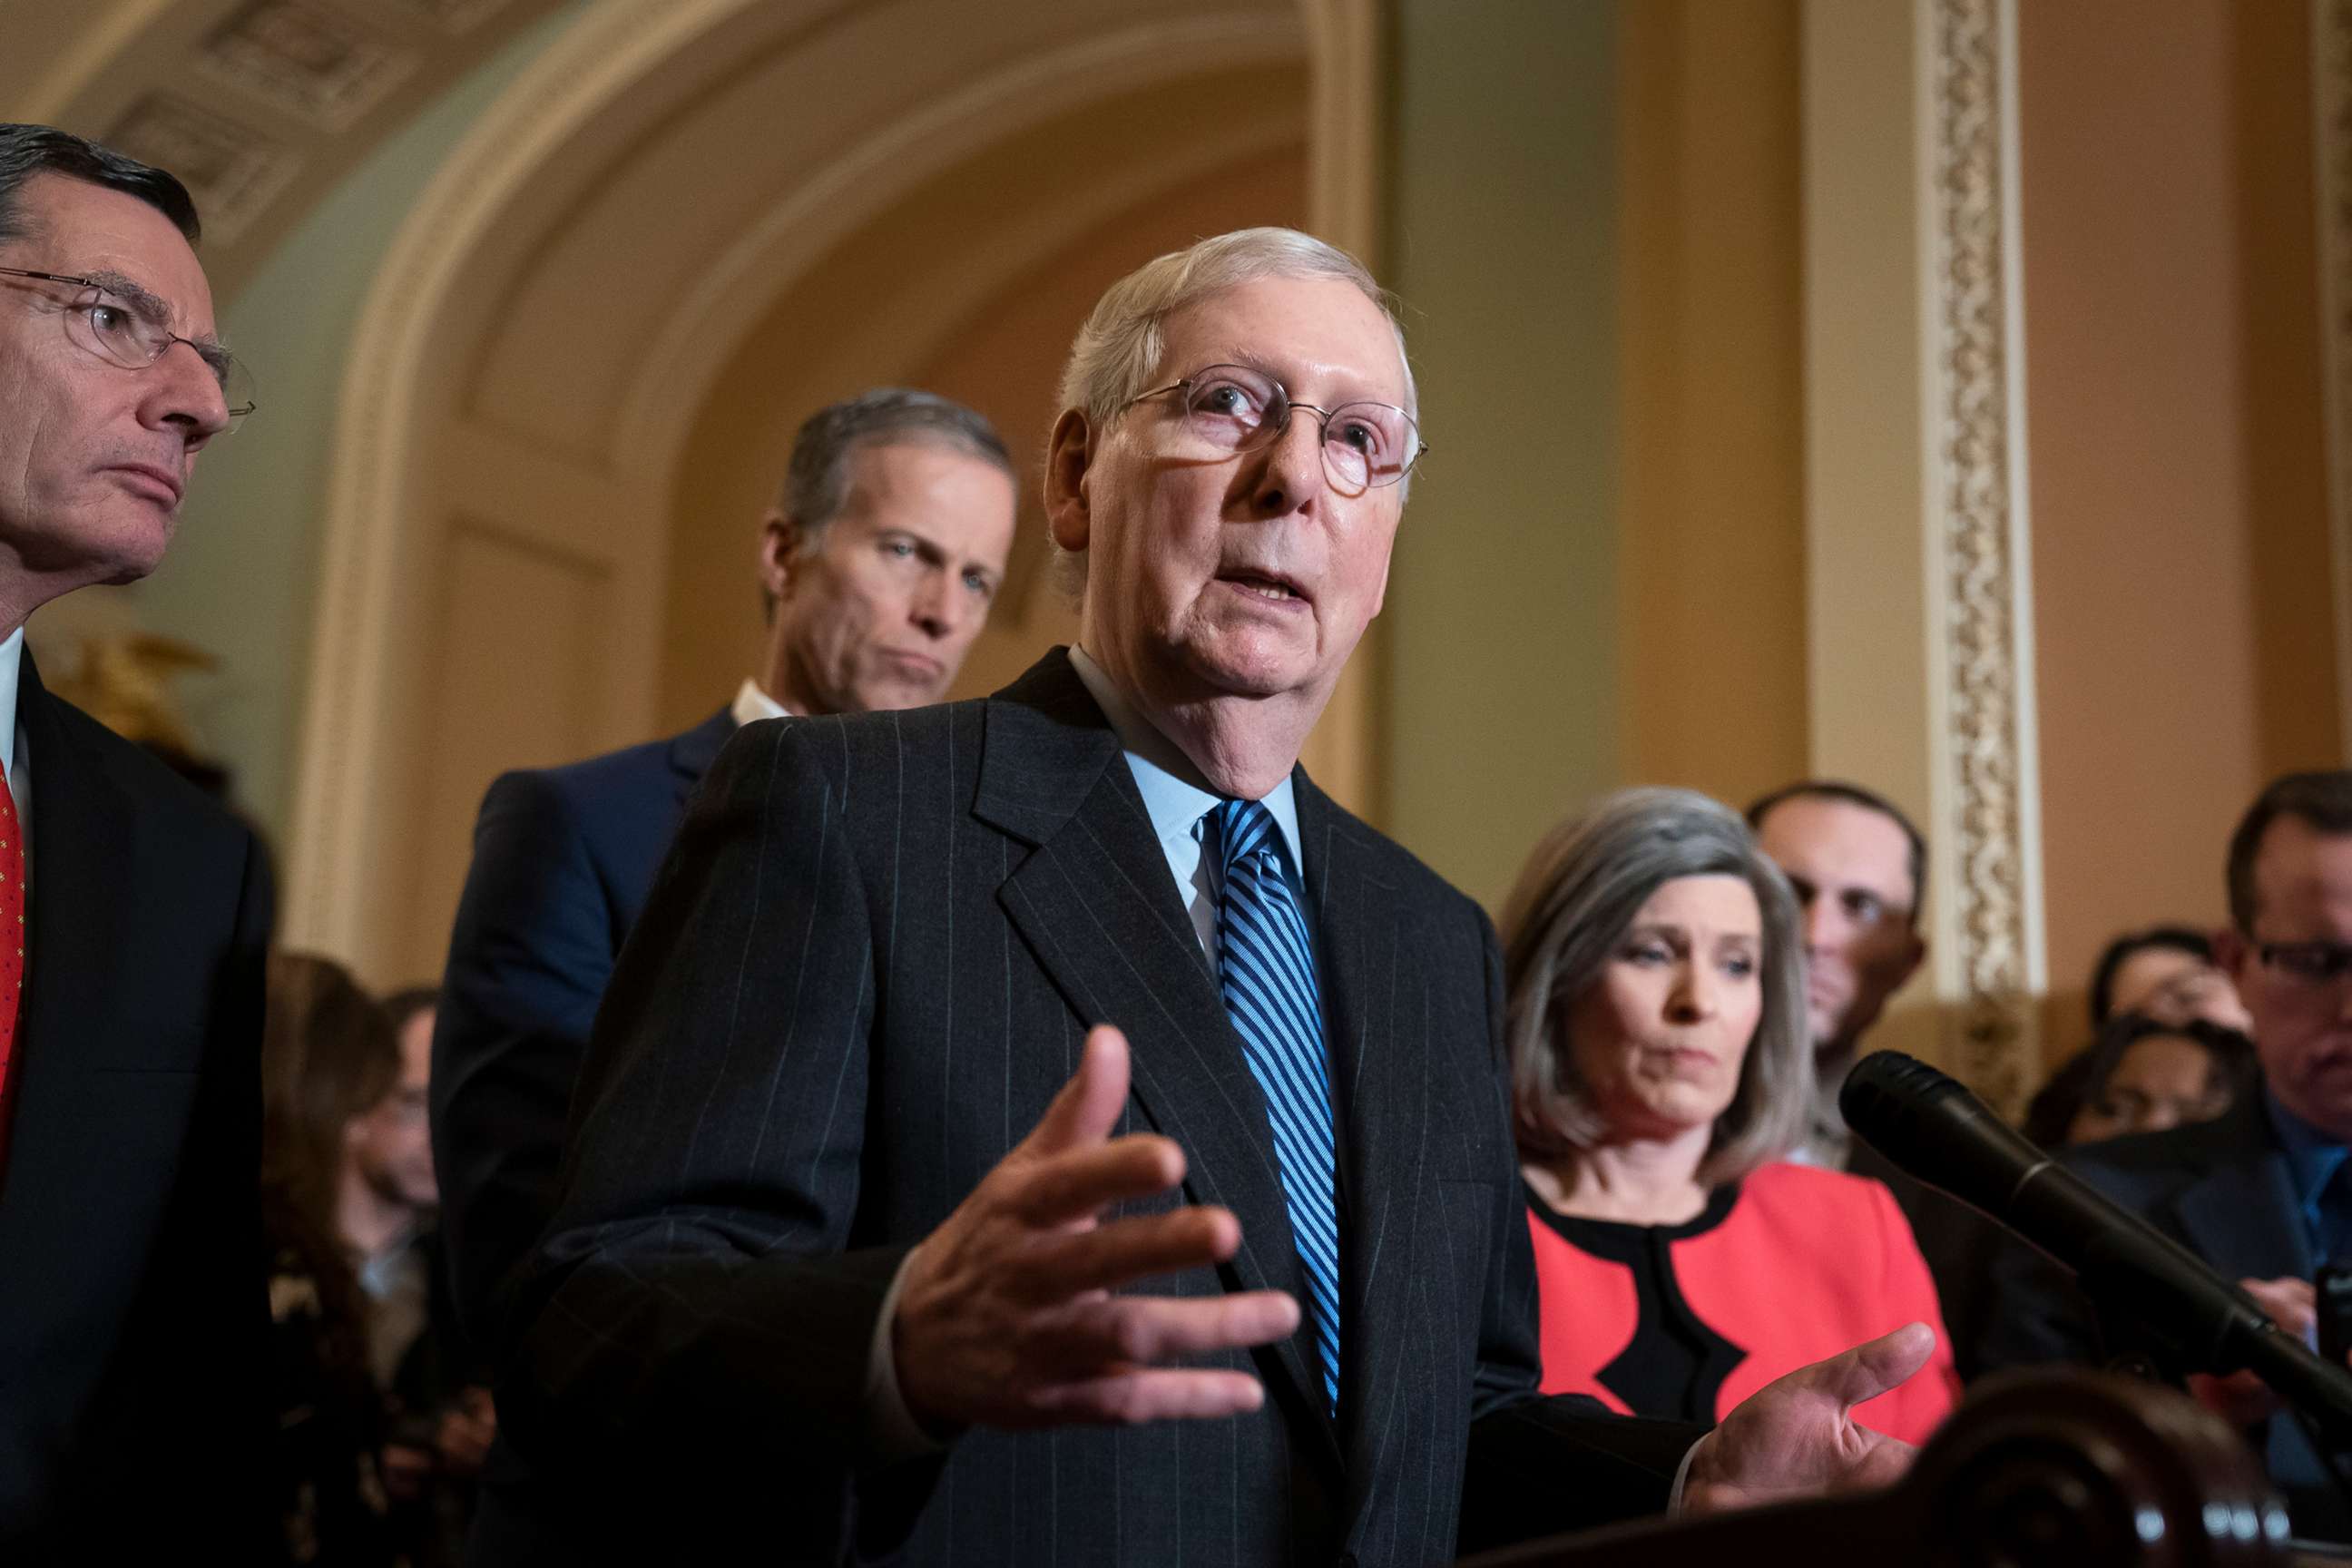 PHOTO: Senate Majority Leader Mitch McConnell tells reporters he has secured enough Republican votes to start President Donald Trump's impeachment trial and postpone a decision on witnesses and documents Democrats want, at the Capitol, Jan. 7, 2020.